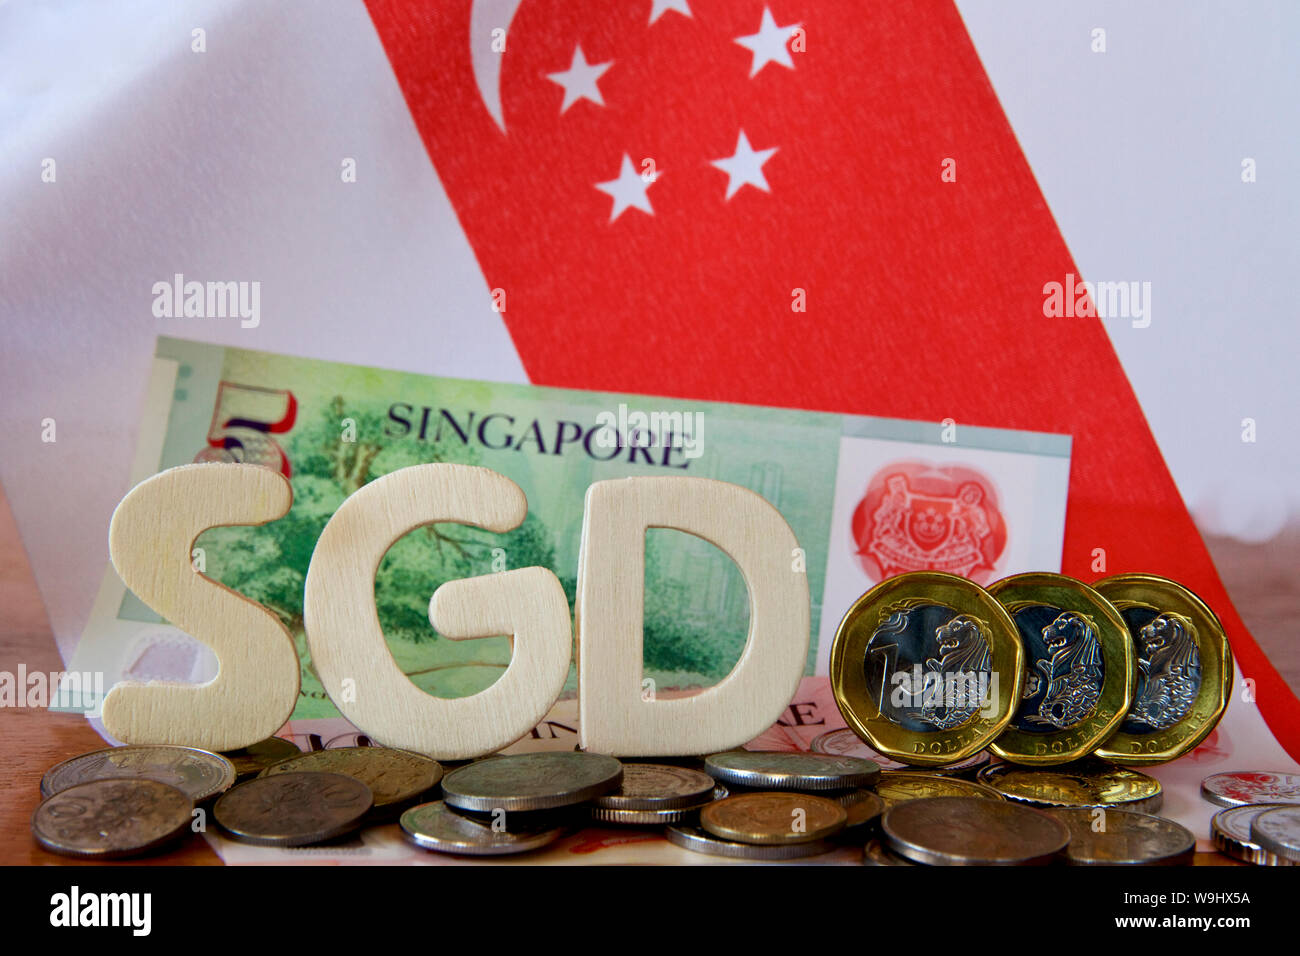 Singaporean dollars and coins with the Singapore flag. Stock Photo